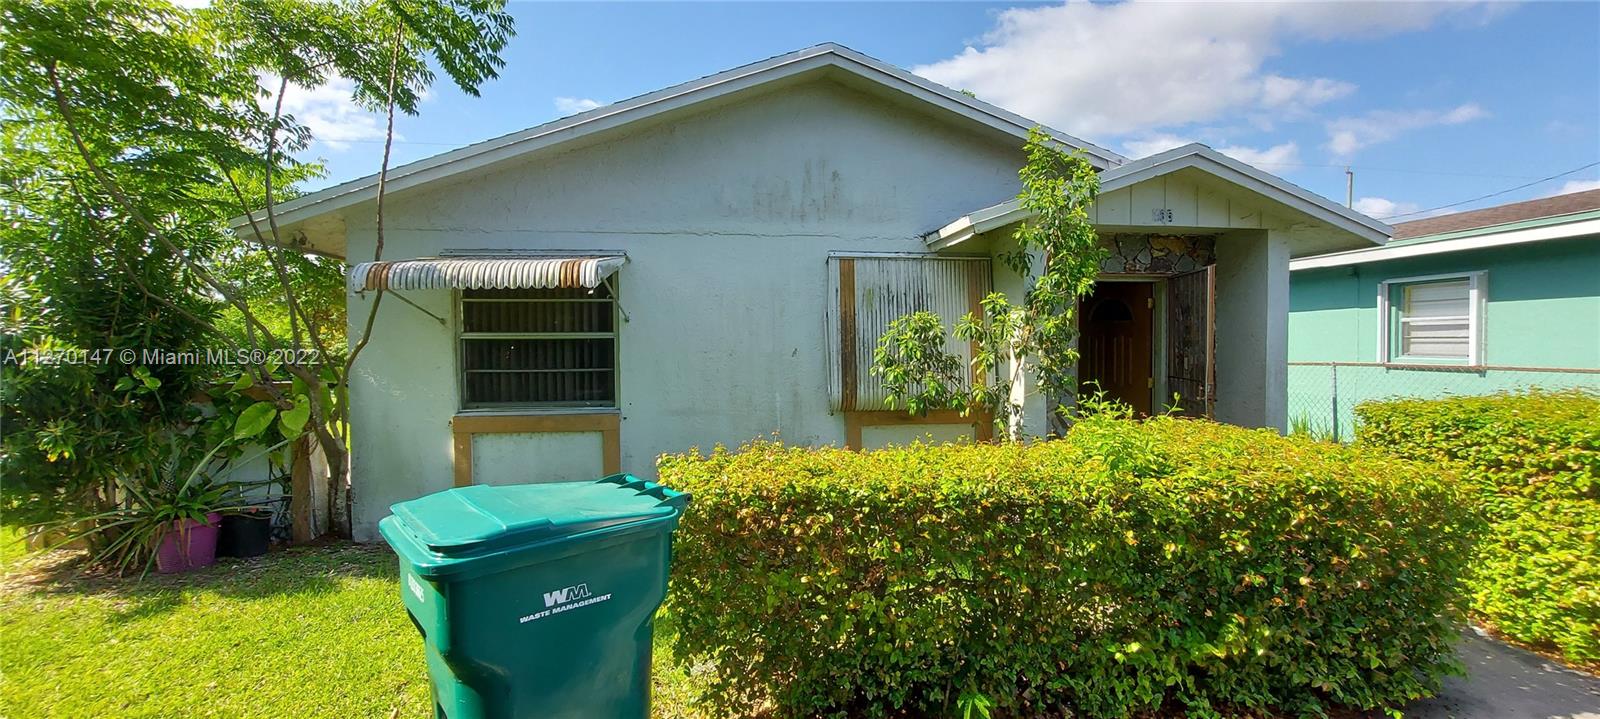 "Handyman special. 3/2 SFH centrally located. Needs updates throughout the property. 
Great for investors looking to take advantage of this unique opportunity where inventory is low. Please do not disturb the tenants. Cash Offers only."